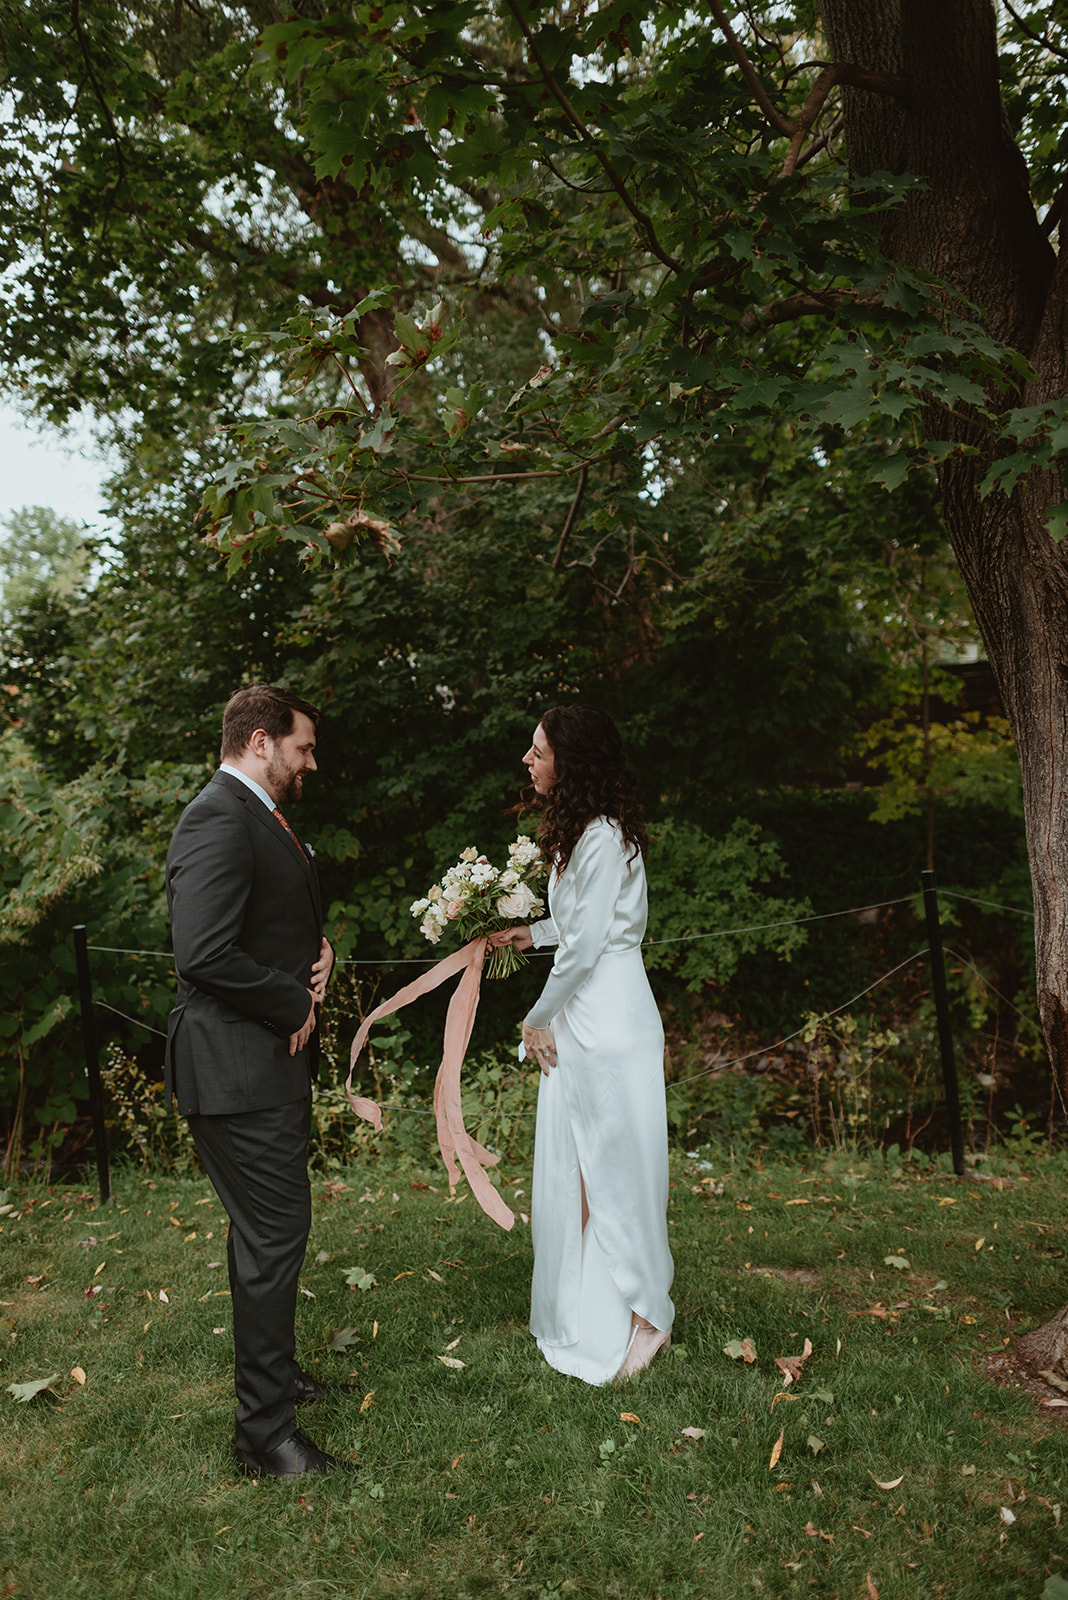 Fun bride and groom first look under the trees for an intimate fall wedding.